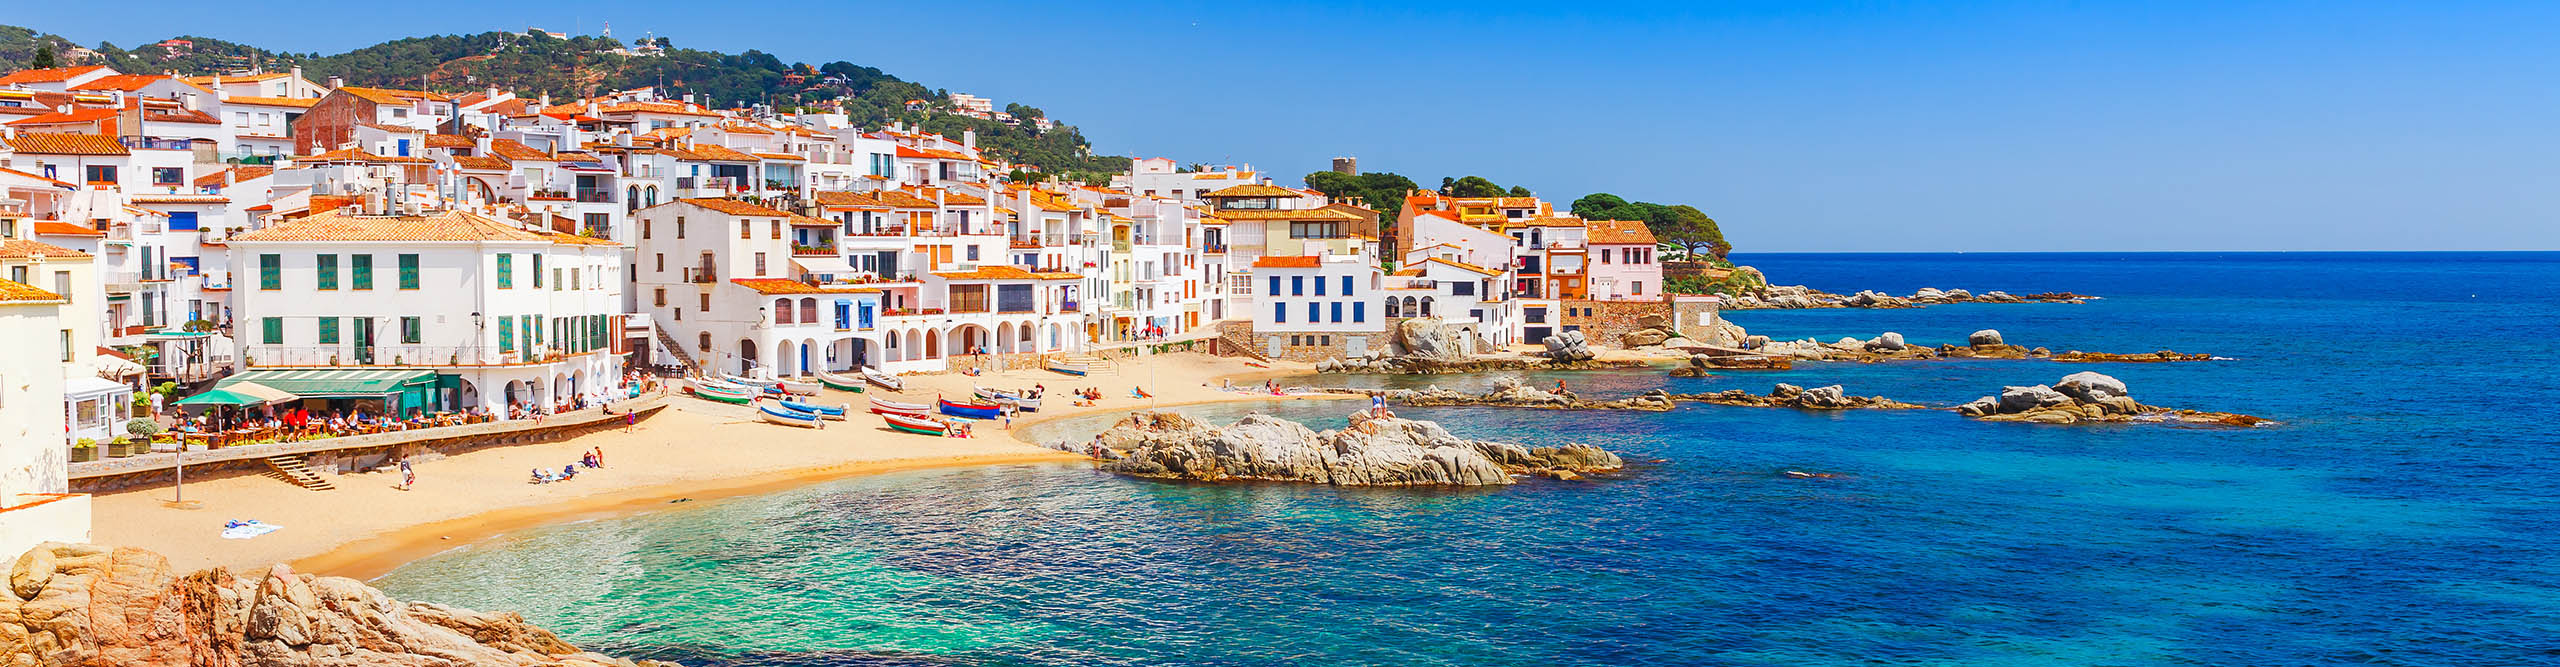 Calella de Palafrugell, fisherman village with nice sand beach and clear blue water, Costa Brava